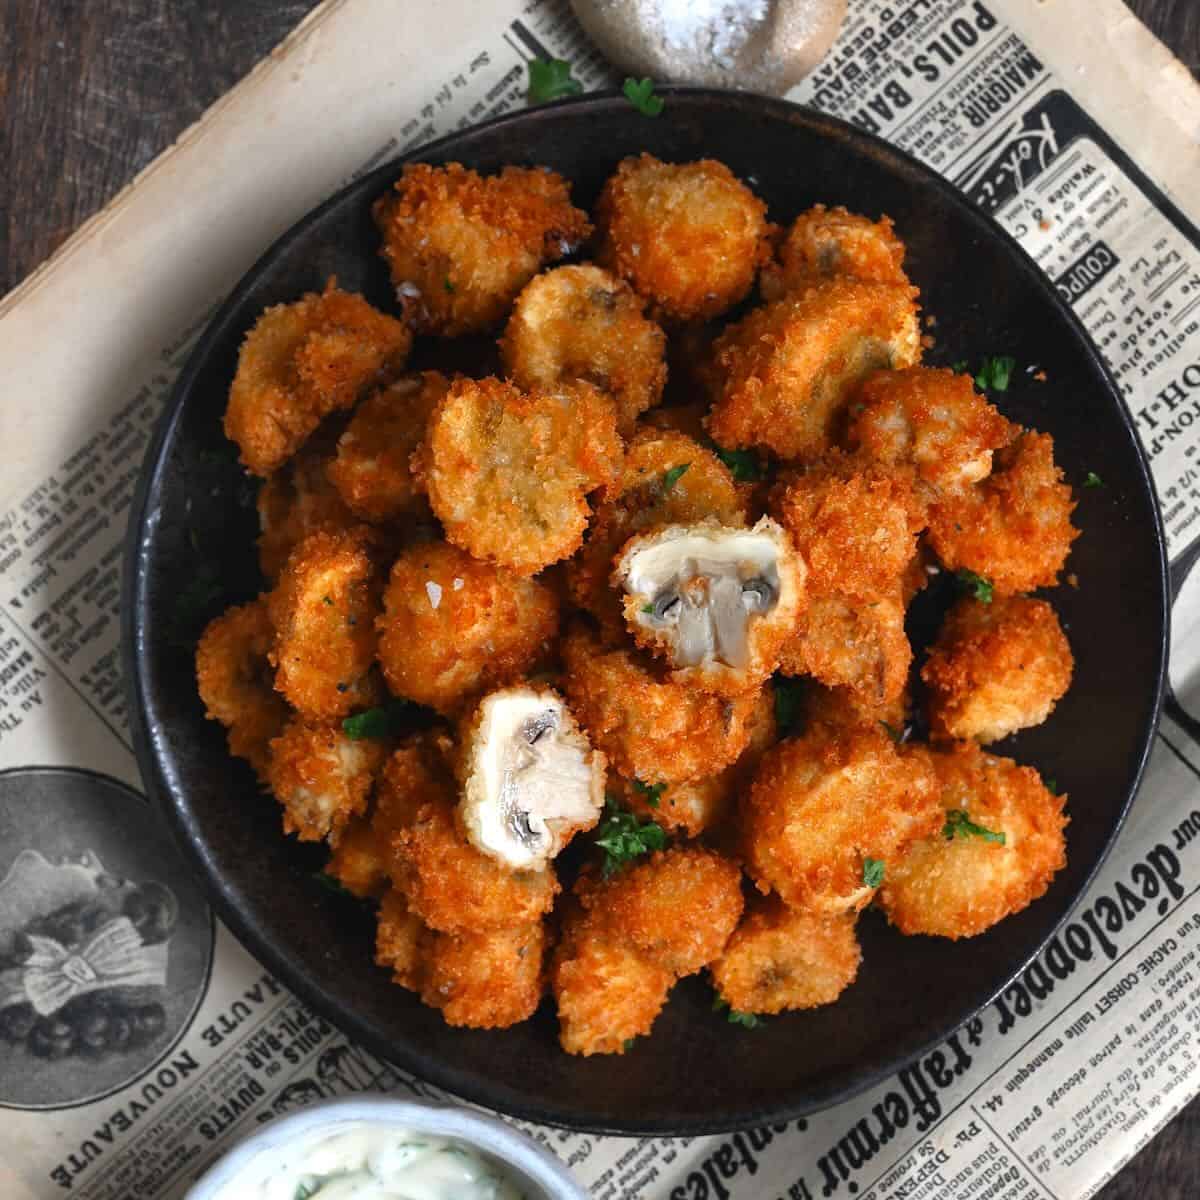 A bowl with fried mushrooms